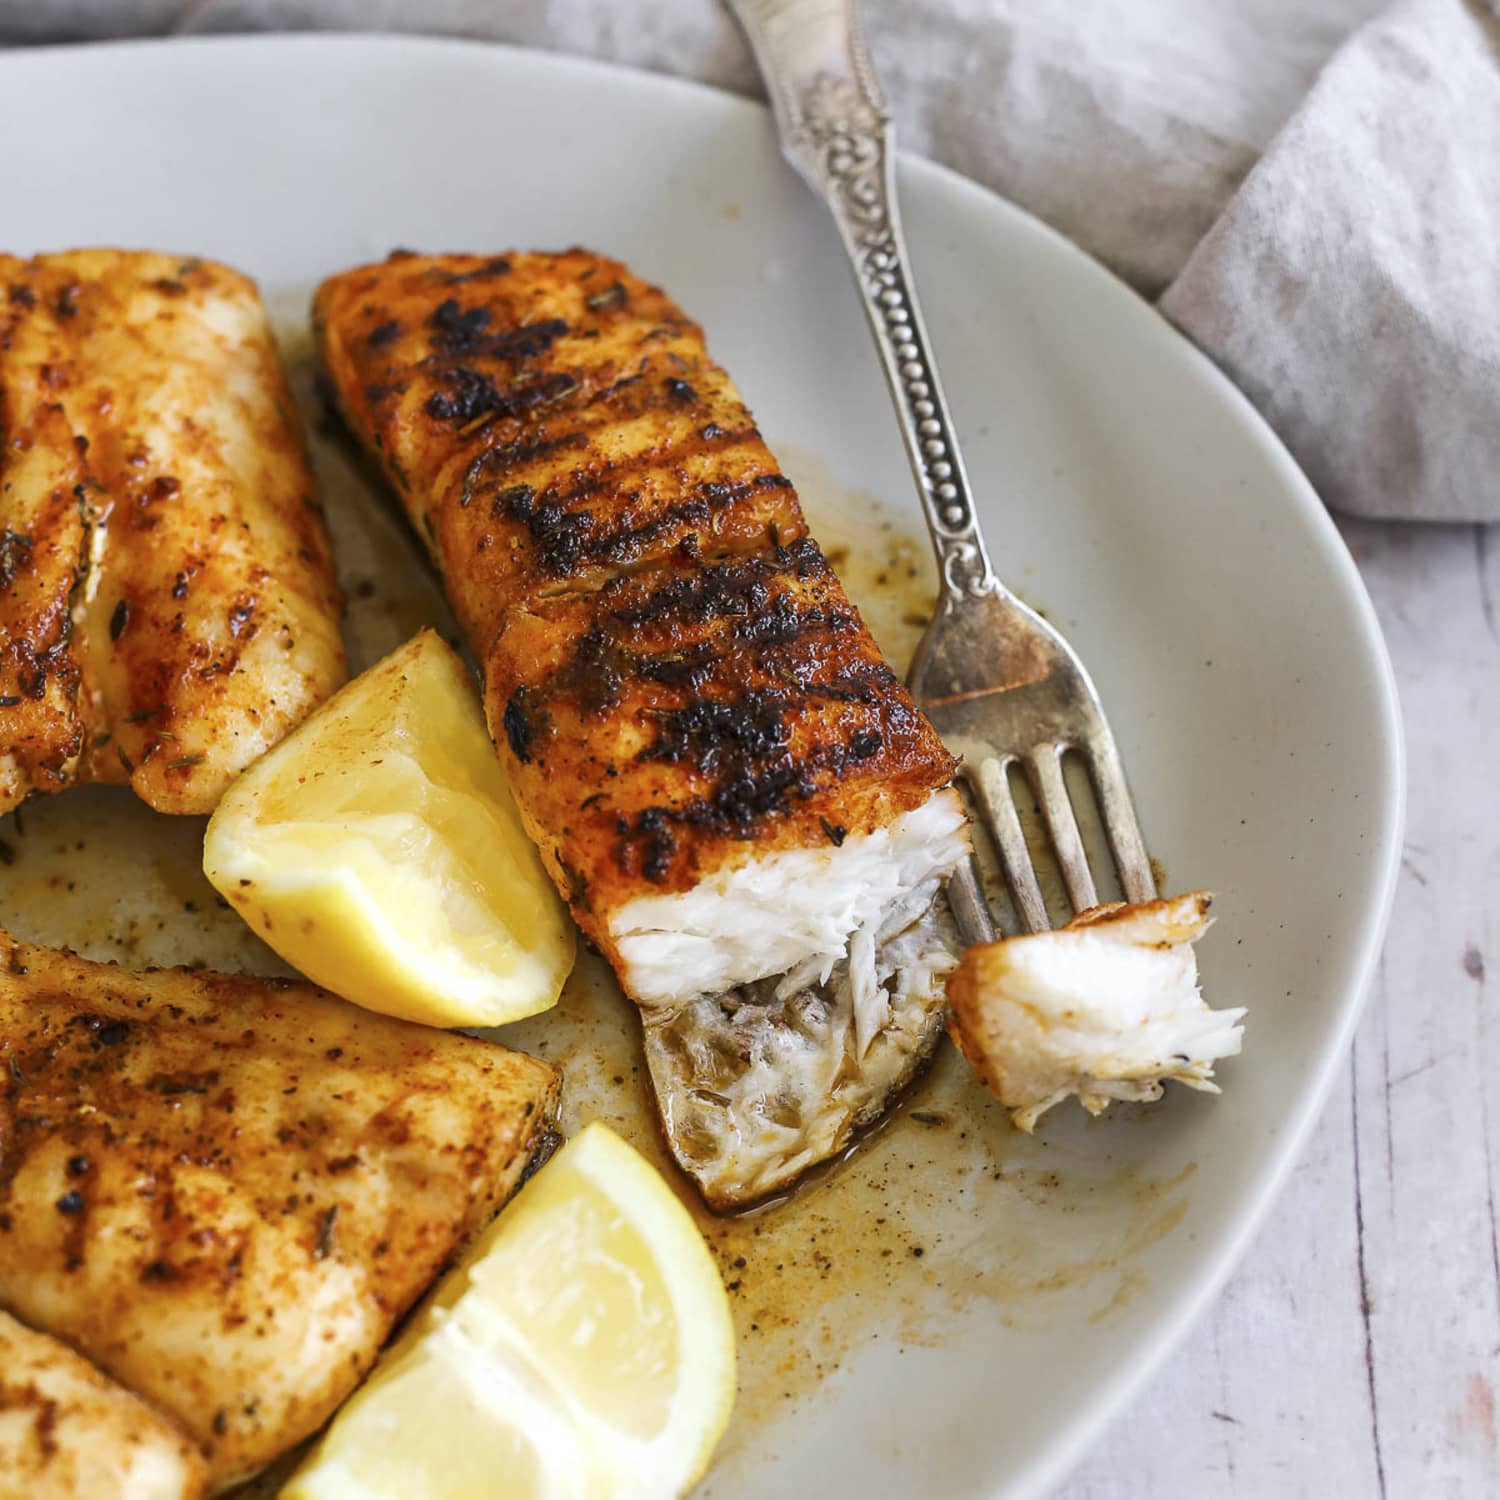 Grilled Red Snapper - This Healthy Table